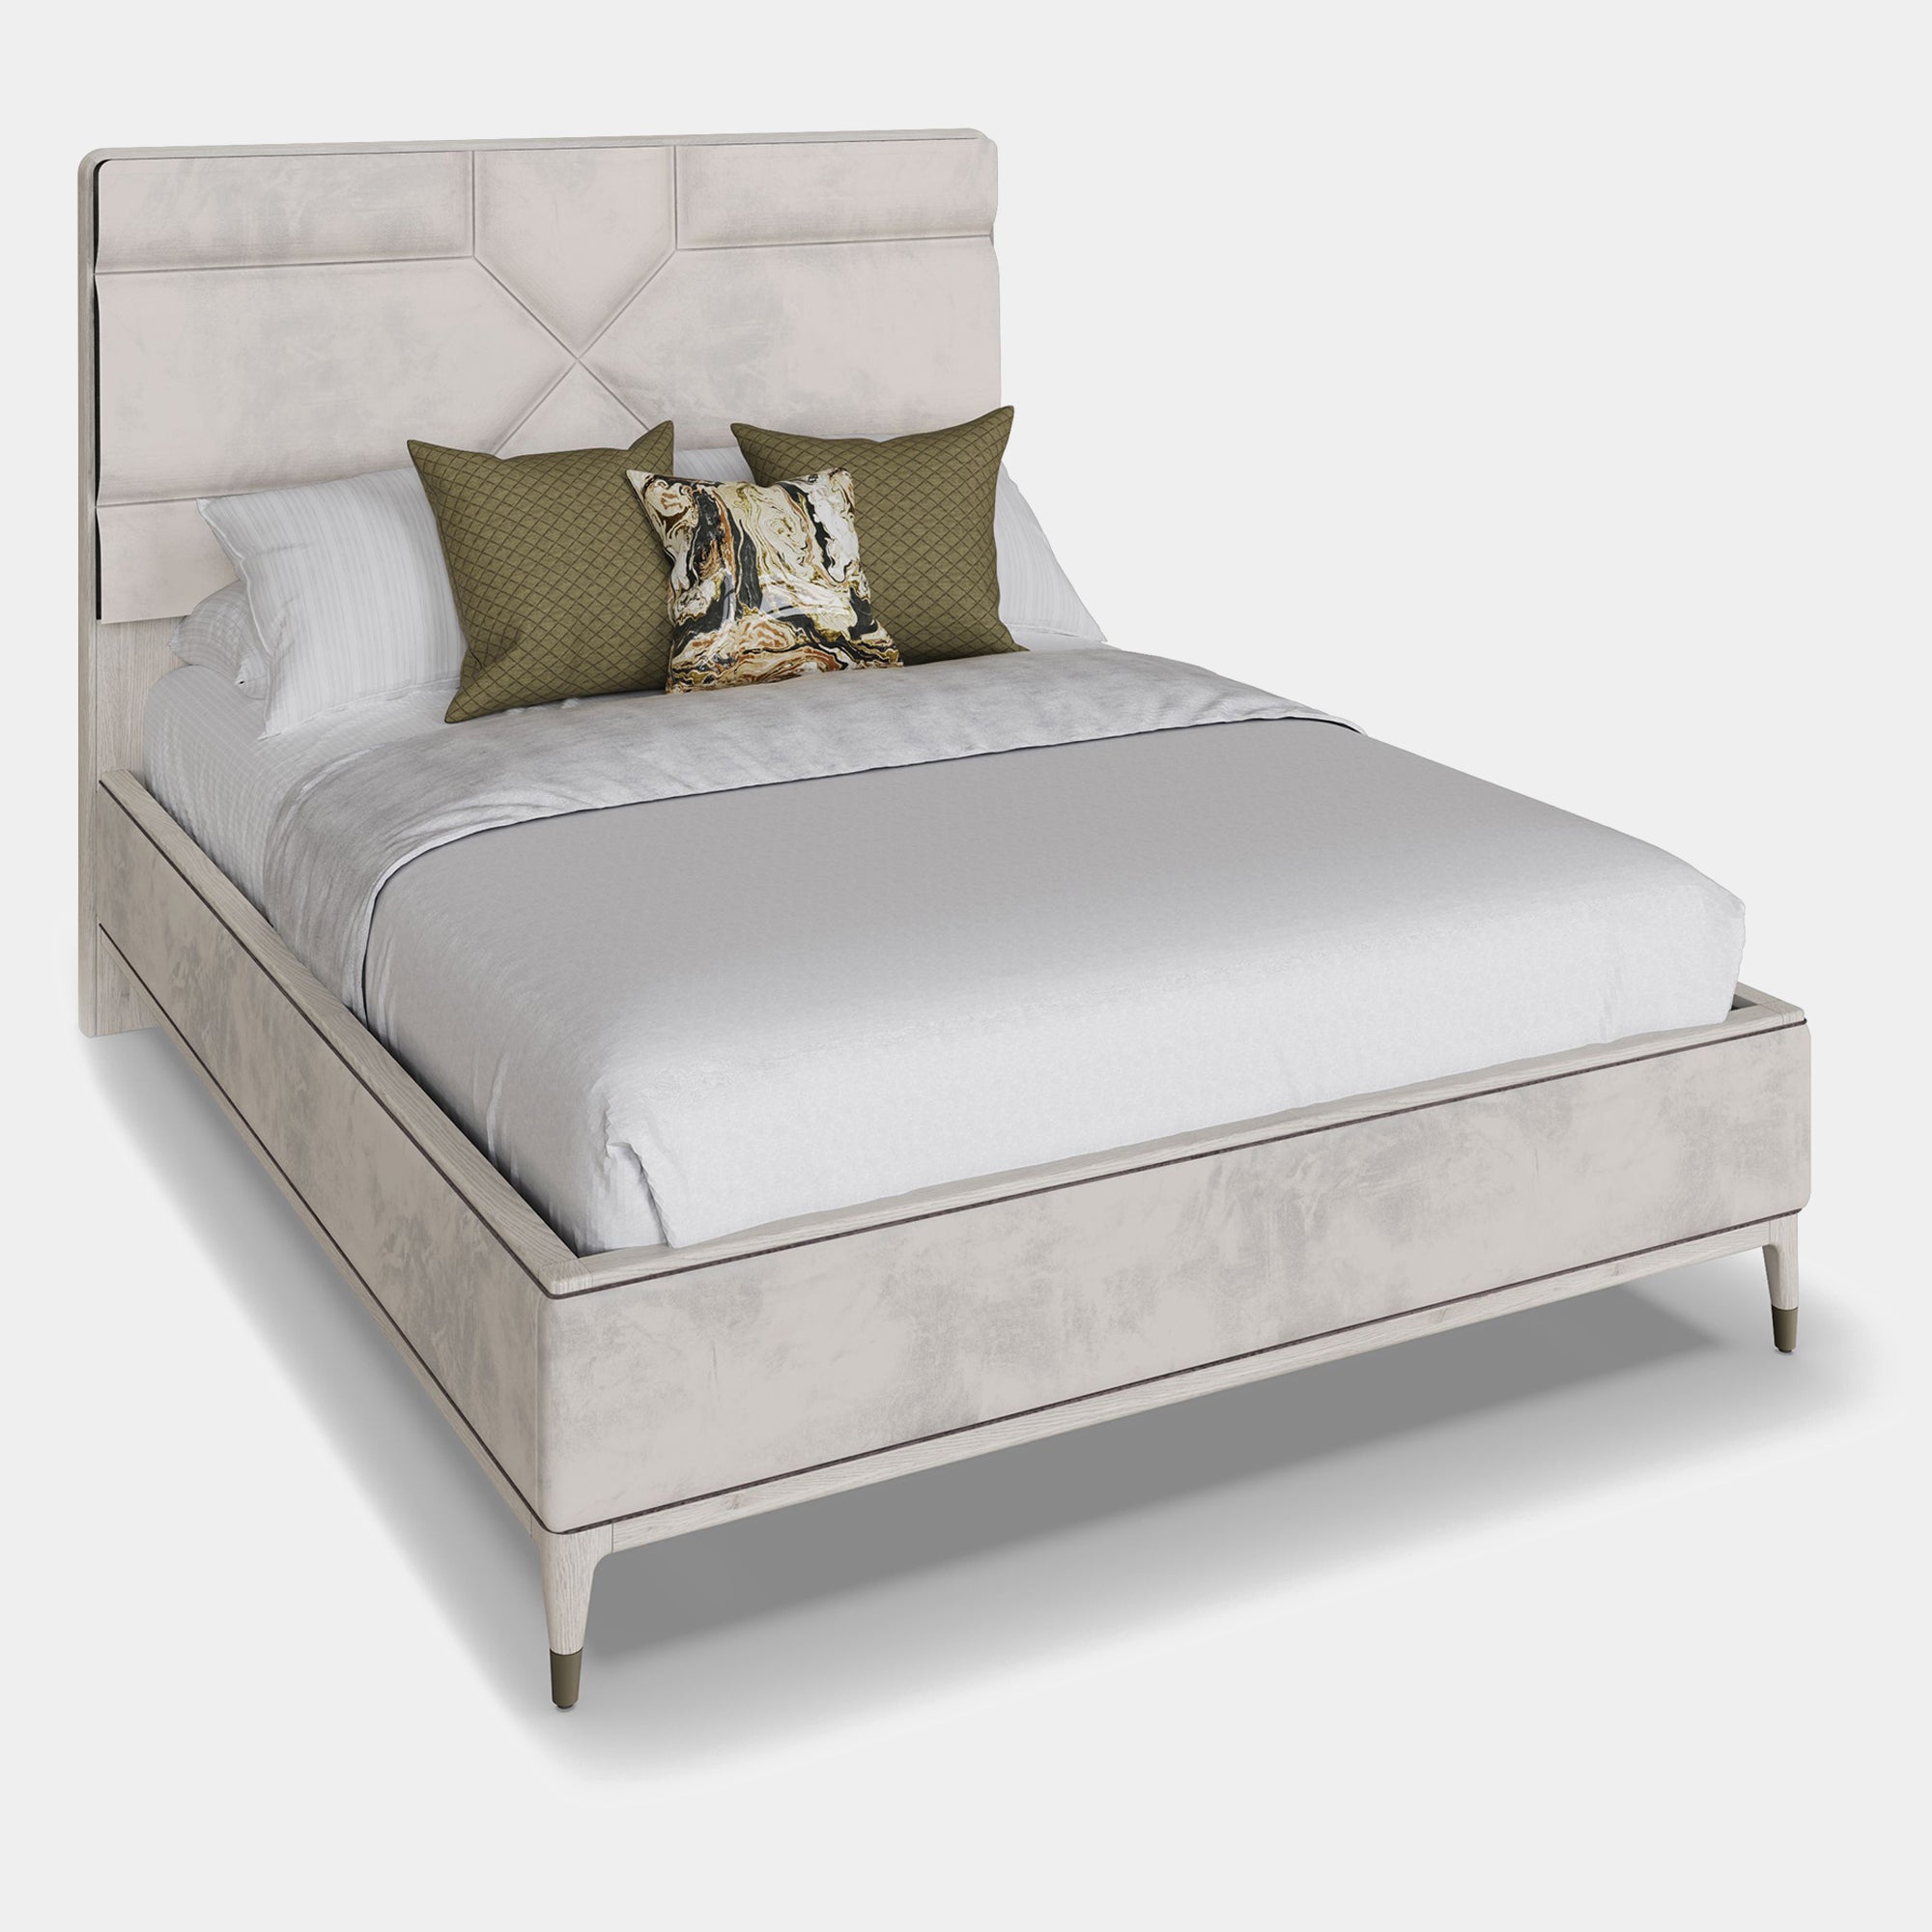 150cm (King) Bed Frame - Stone Finish (Supplied Packed Flat)